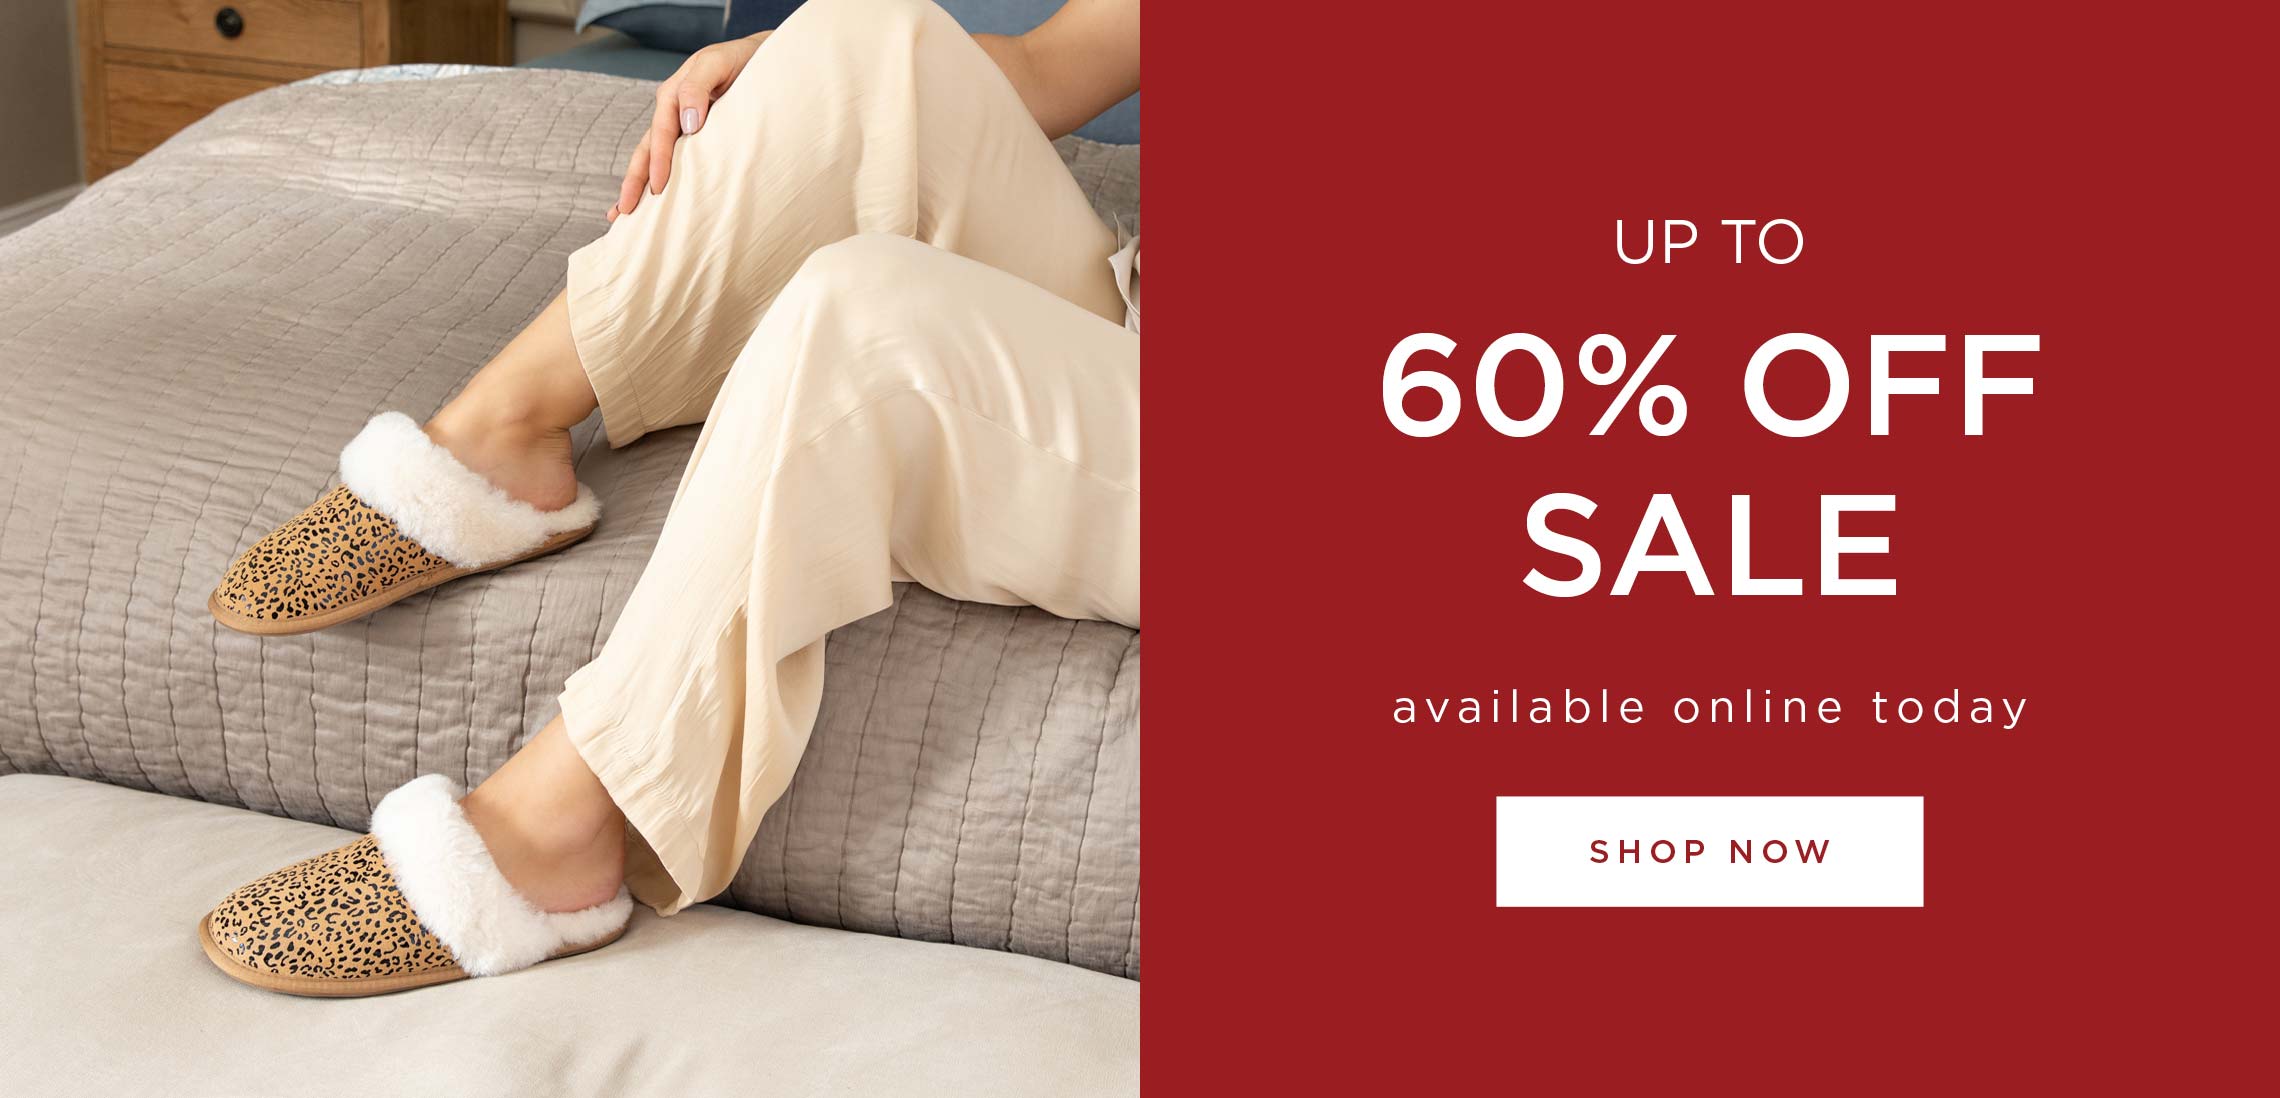 Up to 60% off sale available online today - shop now